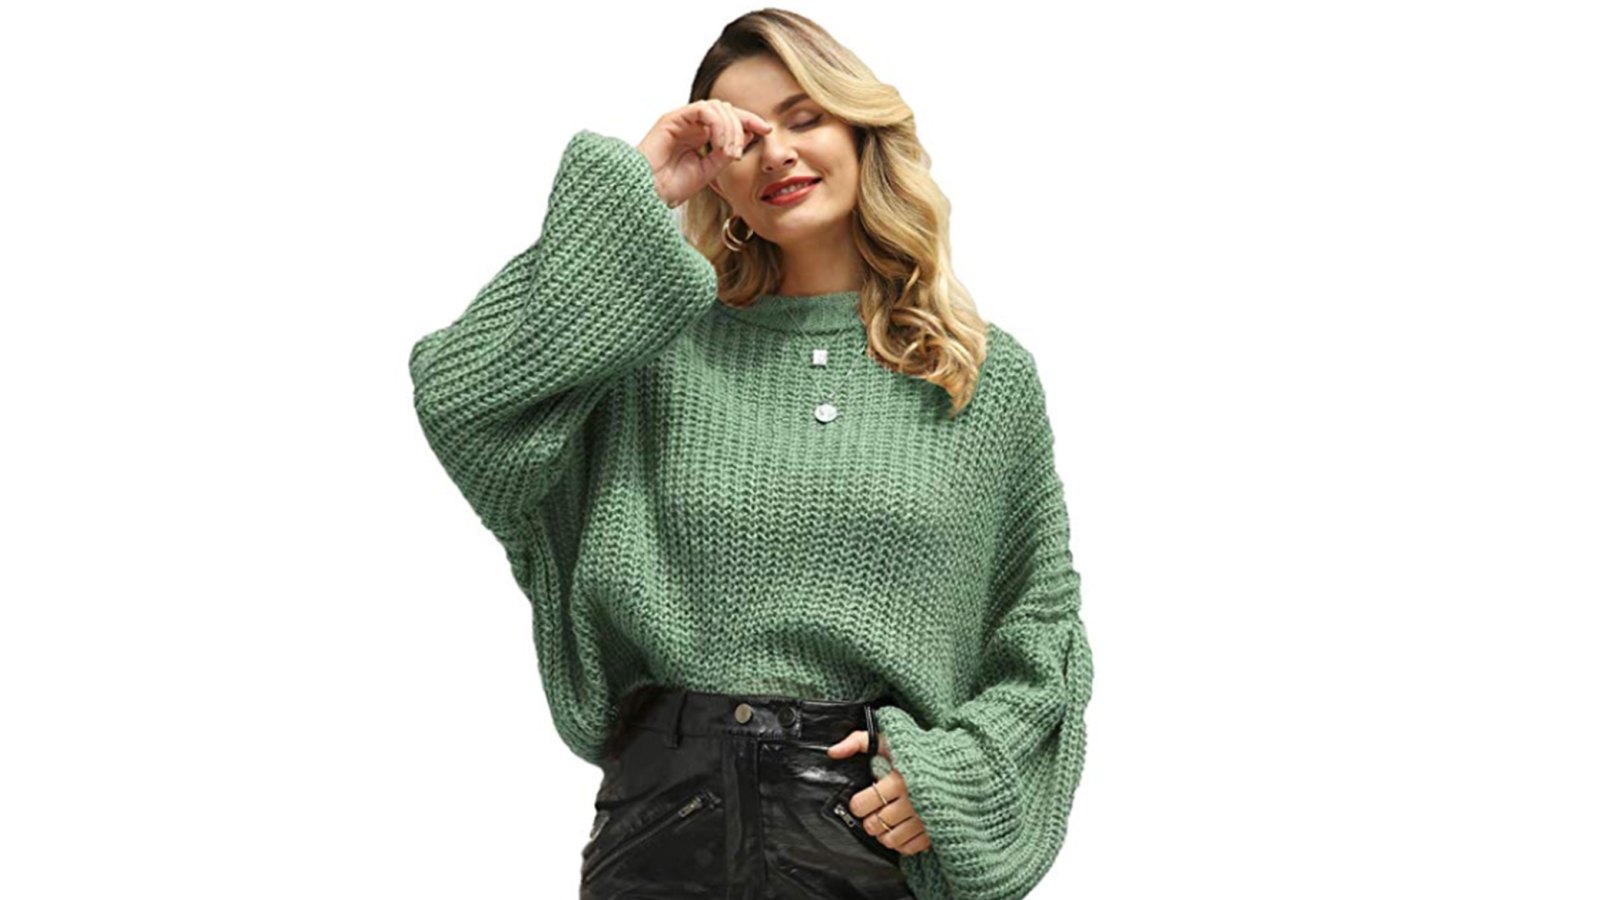 Simplee Oversized Knit Sweater Is Under-$50 and Seriously Chic | Us Weekly